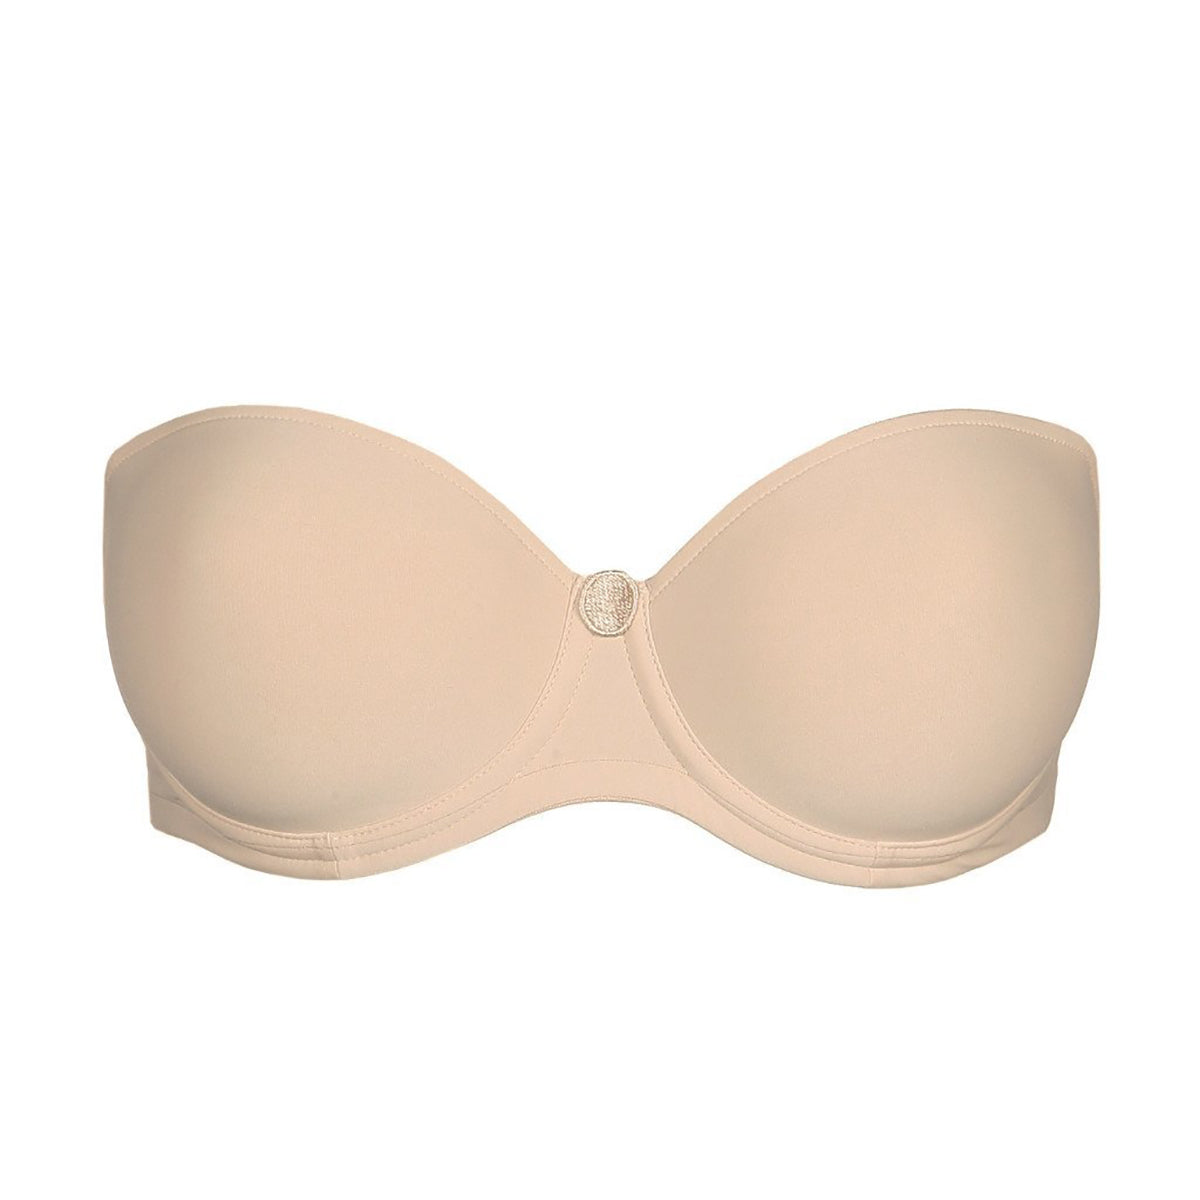 Ultra Thin Strapless Bra For Women Sexy, Invisible, Non Slip Lingerie With  Full Support And Unpad 2023 Lady V Shape Underwear From Bdaltogether21,  $12.89